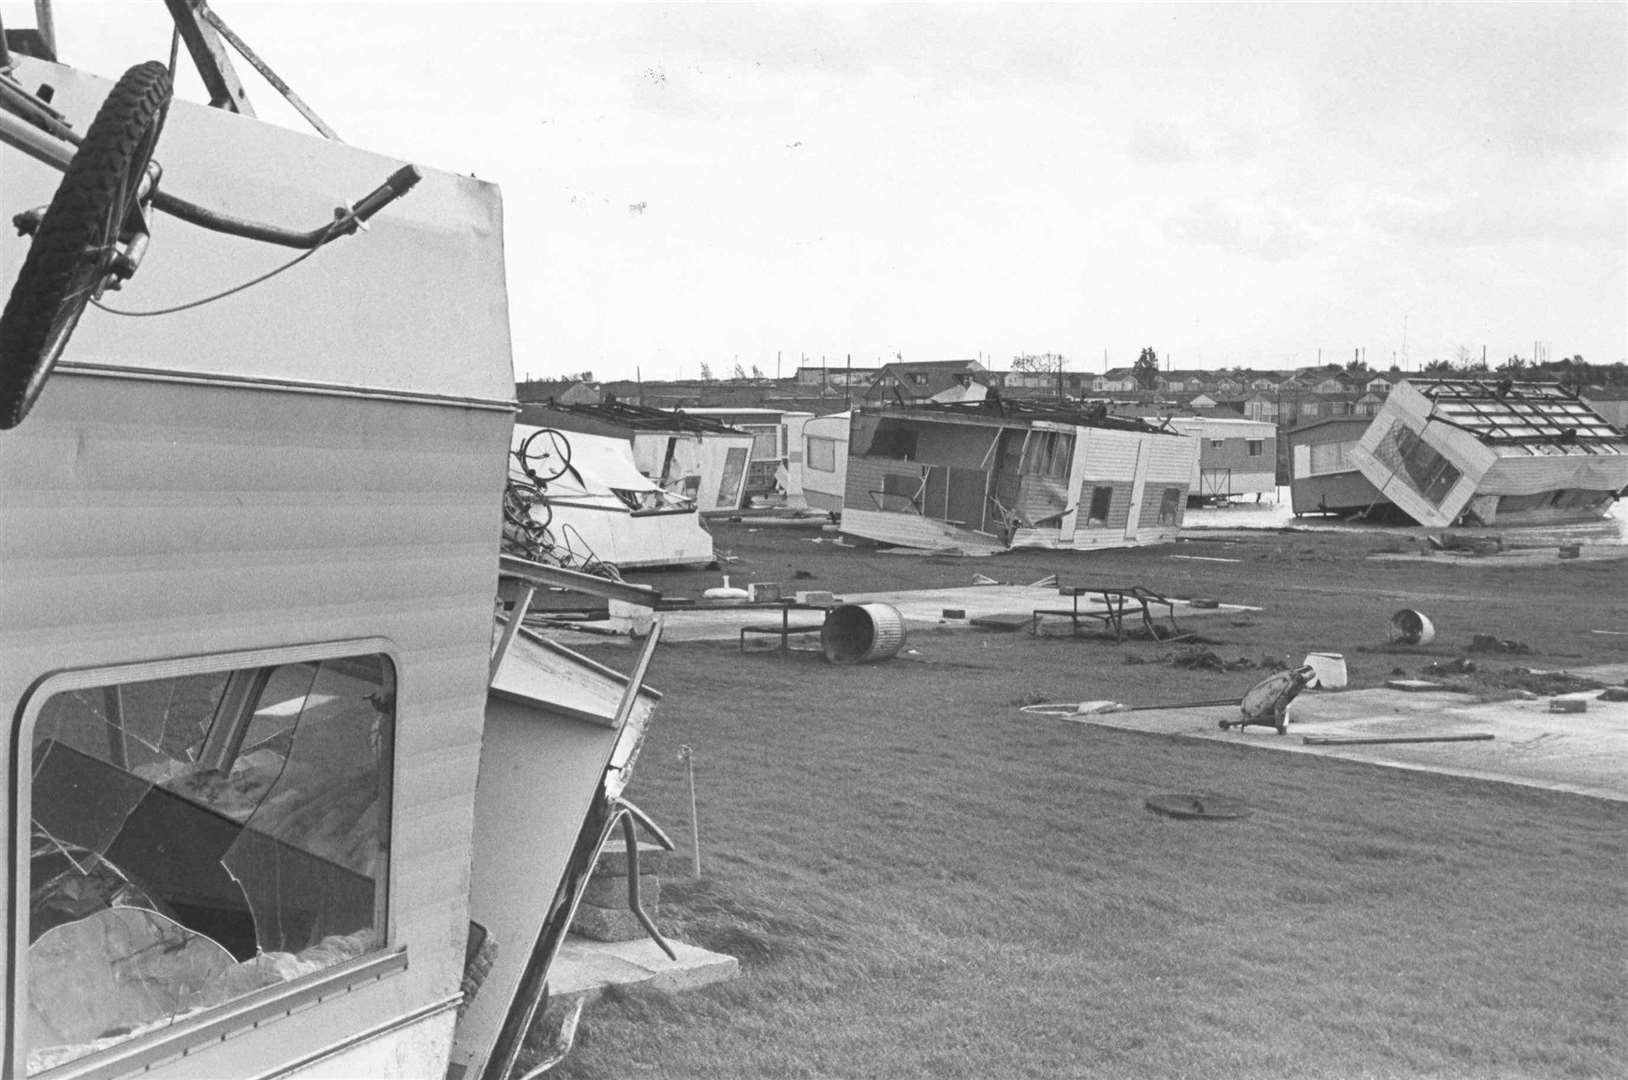 Dozens of caravans were blown over at the White Horse leisure caravan park in Leysdown on the Isle of Sheppey when the Great Storm hit in October 1987